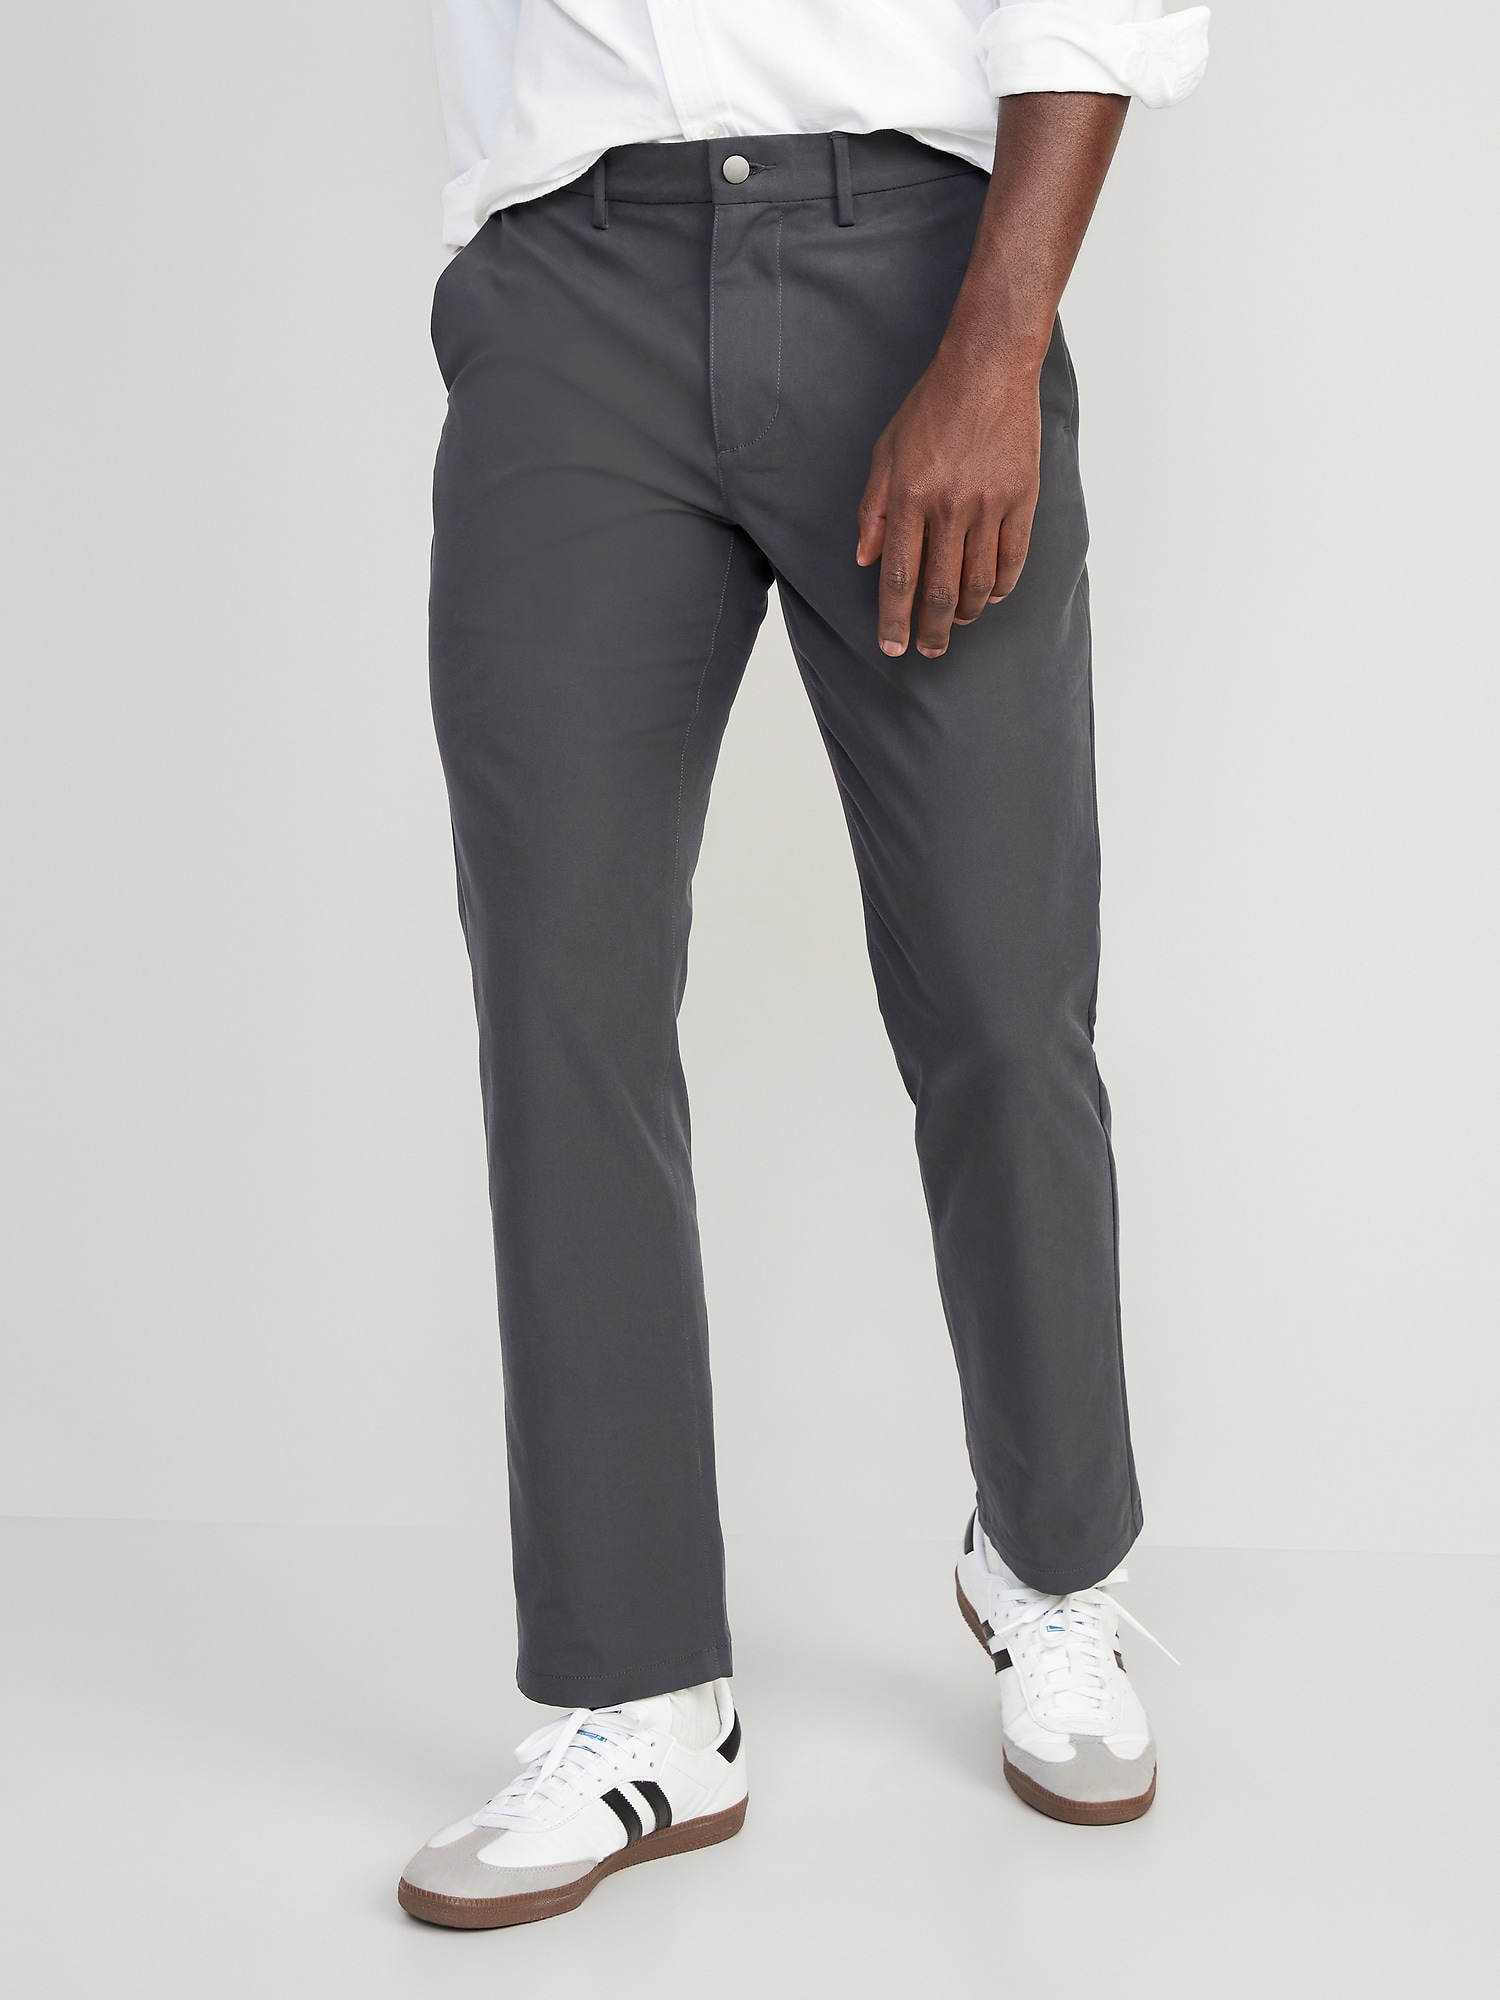 Straight Ultimate Tech Built-In Flex Chino Pants | Old Navy